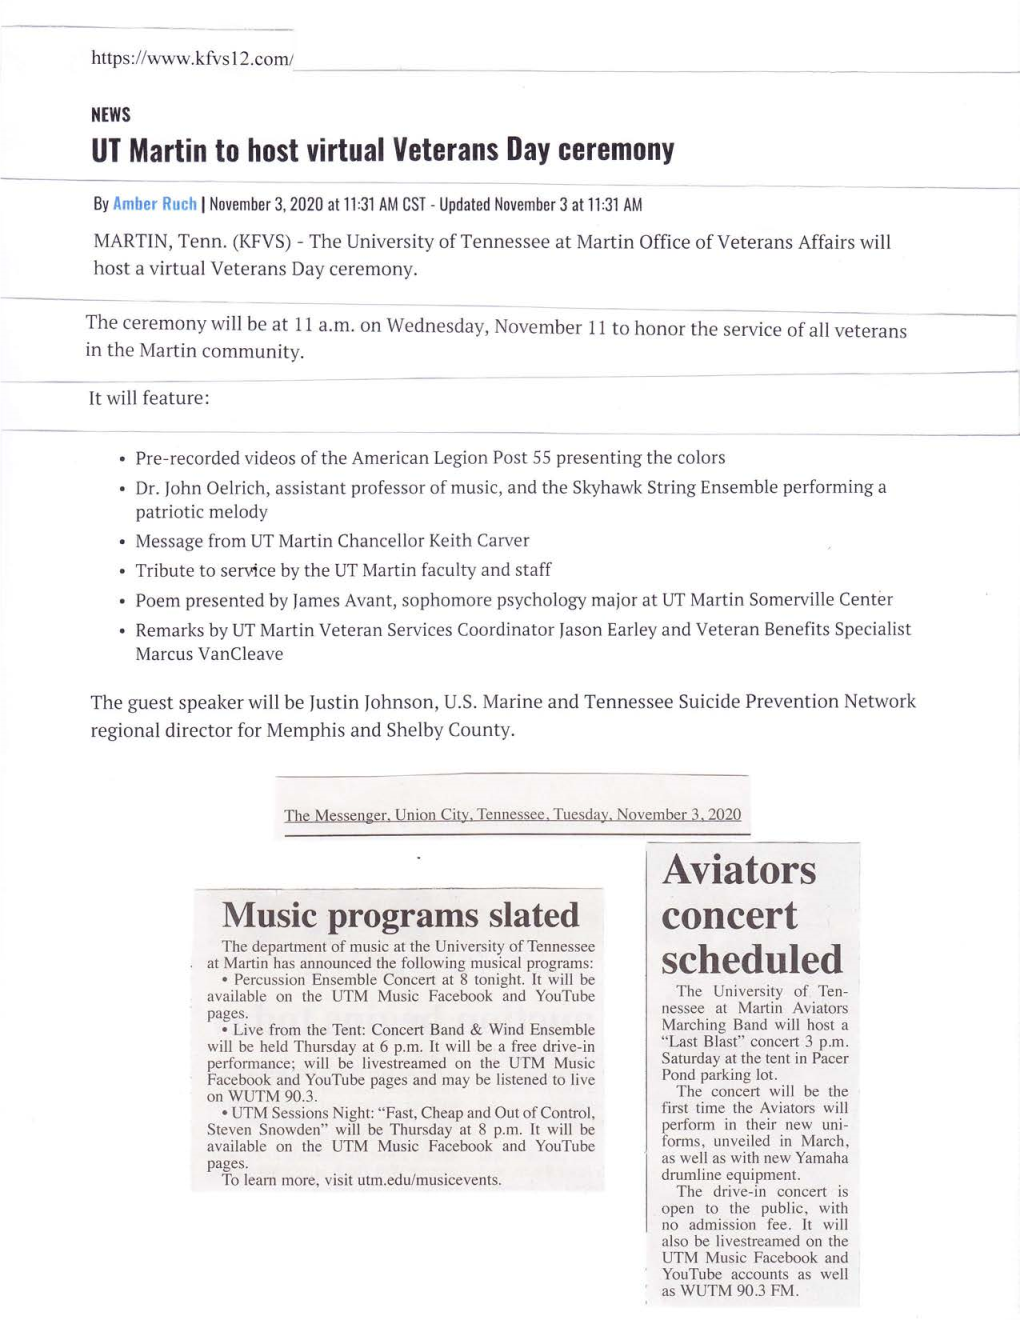 Aviators Music Programs Slated Concert the Department of Music at the University of Tennessee at Martin Has Announced the Following Musical Programs